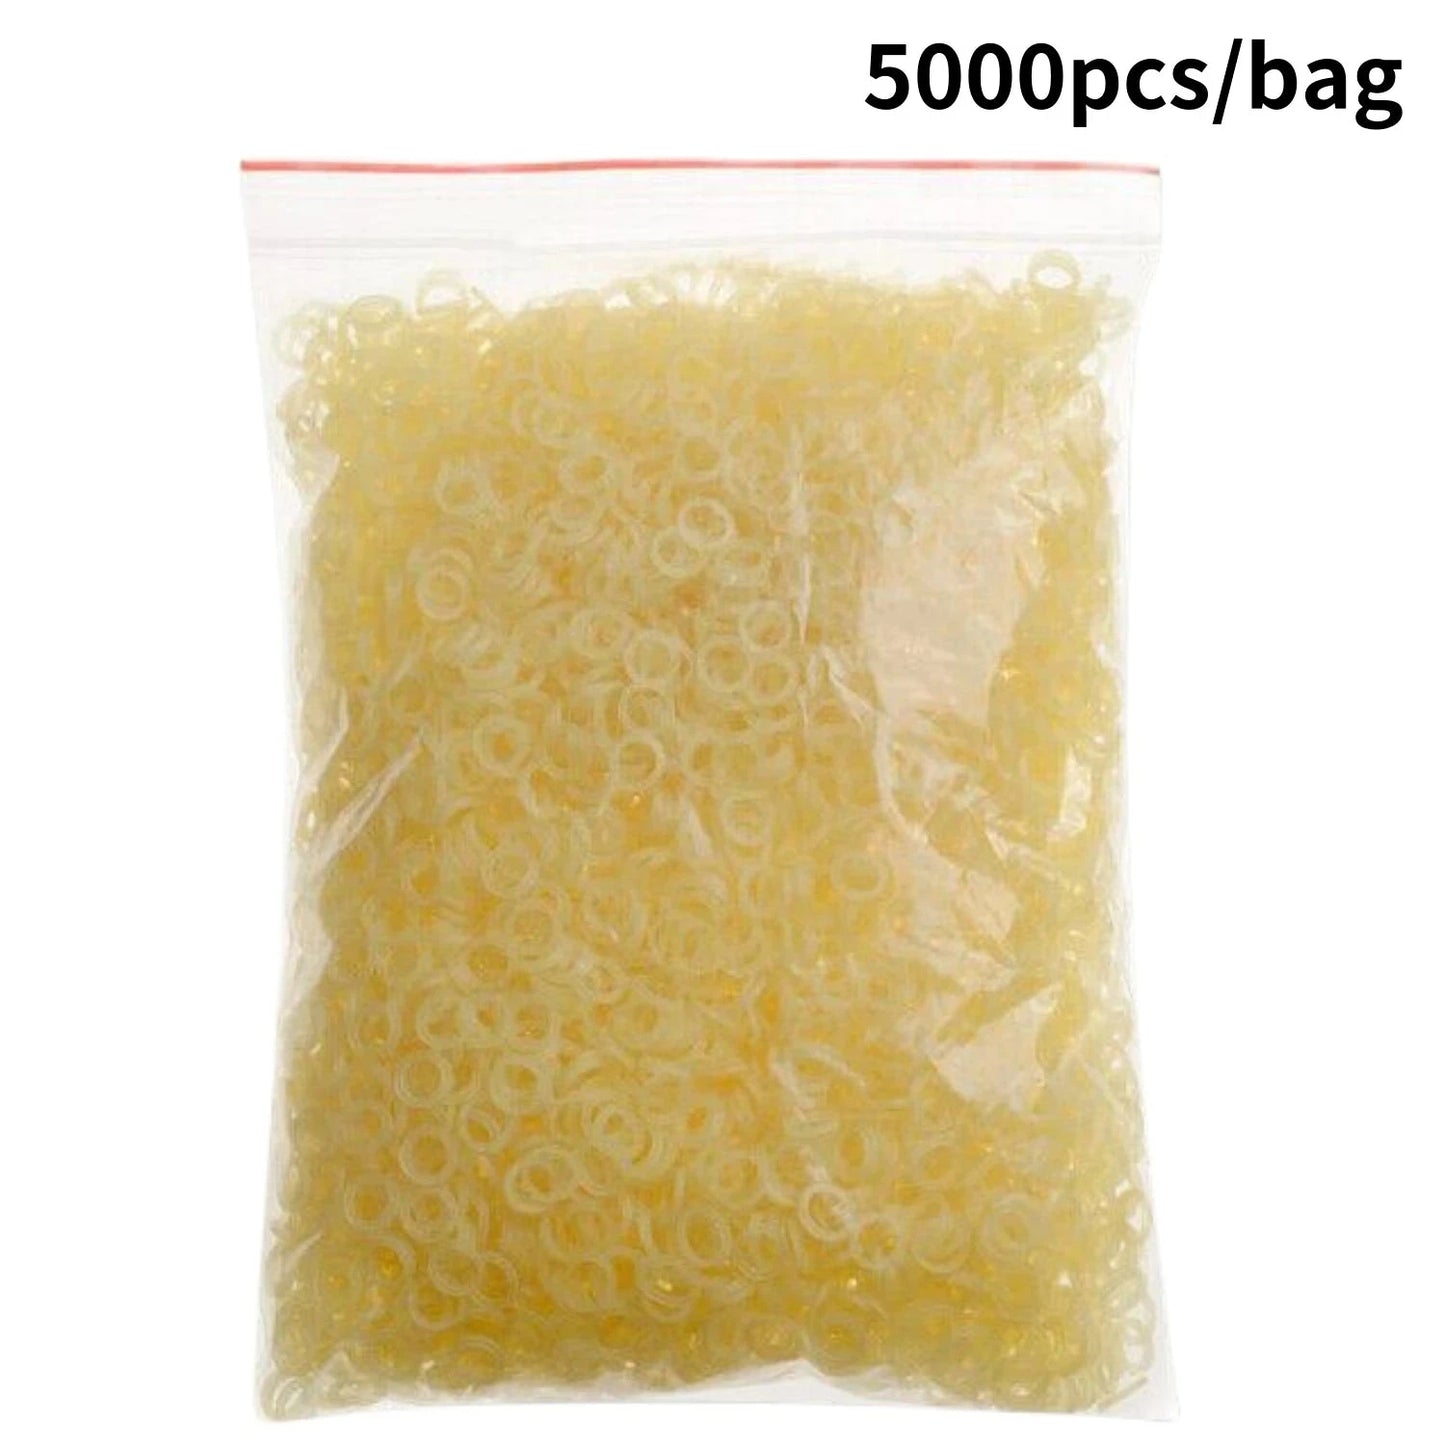 OrthoExtent Orthodontic Intra-Oral Bands - 5000Pcs for Braces